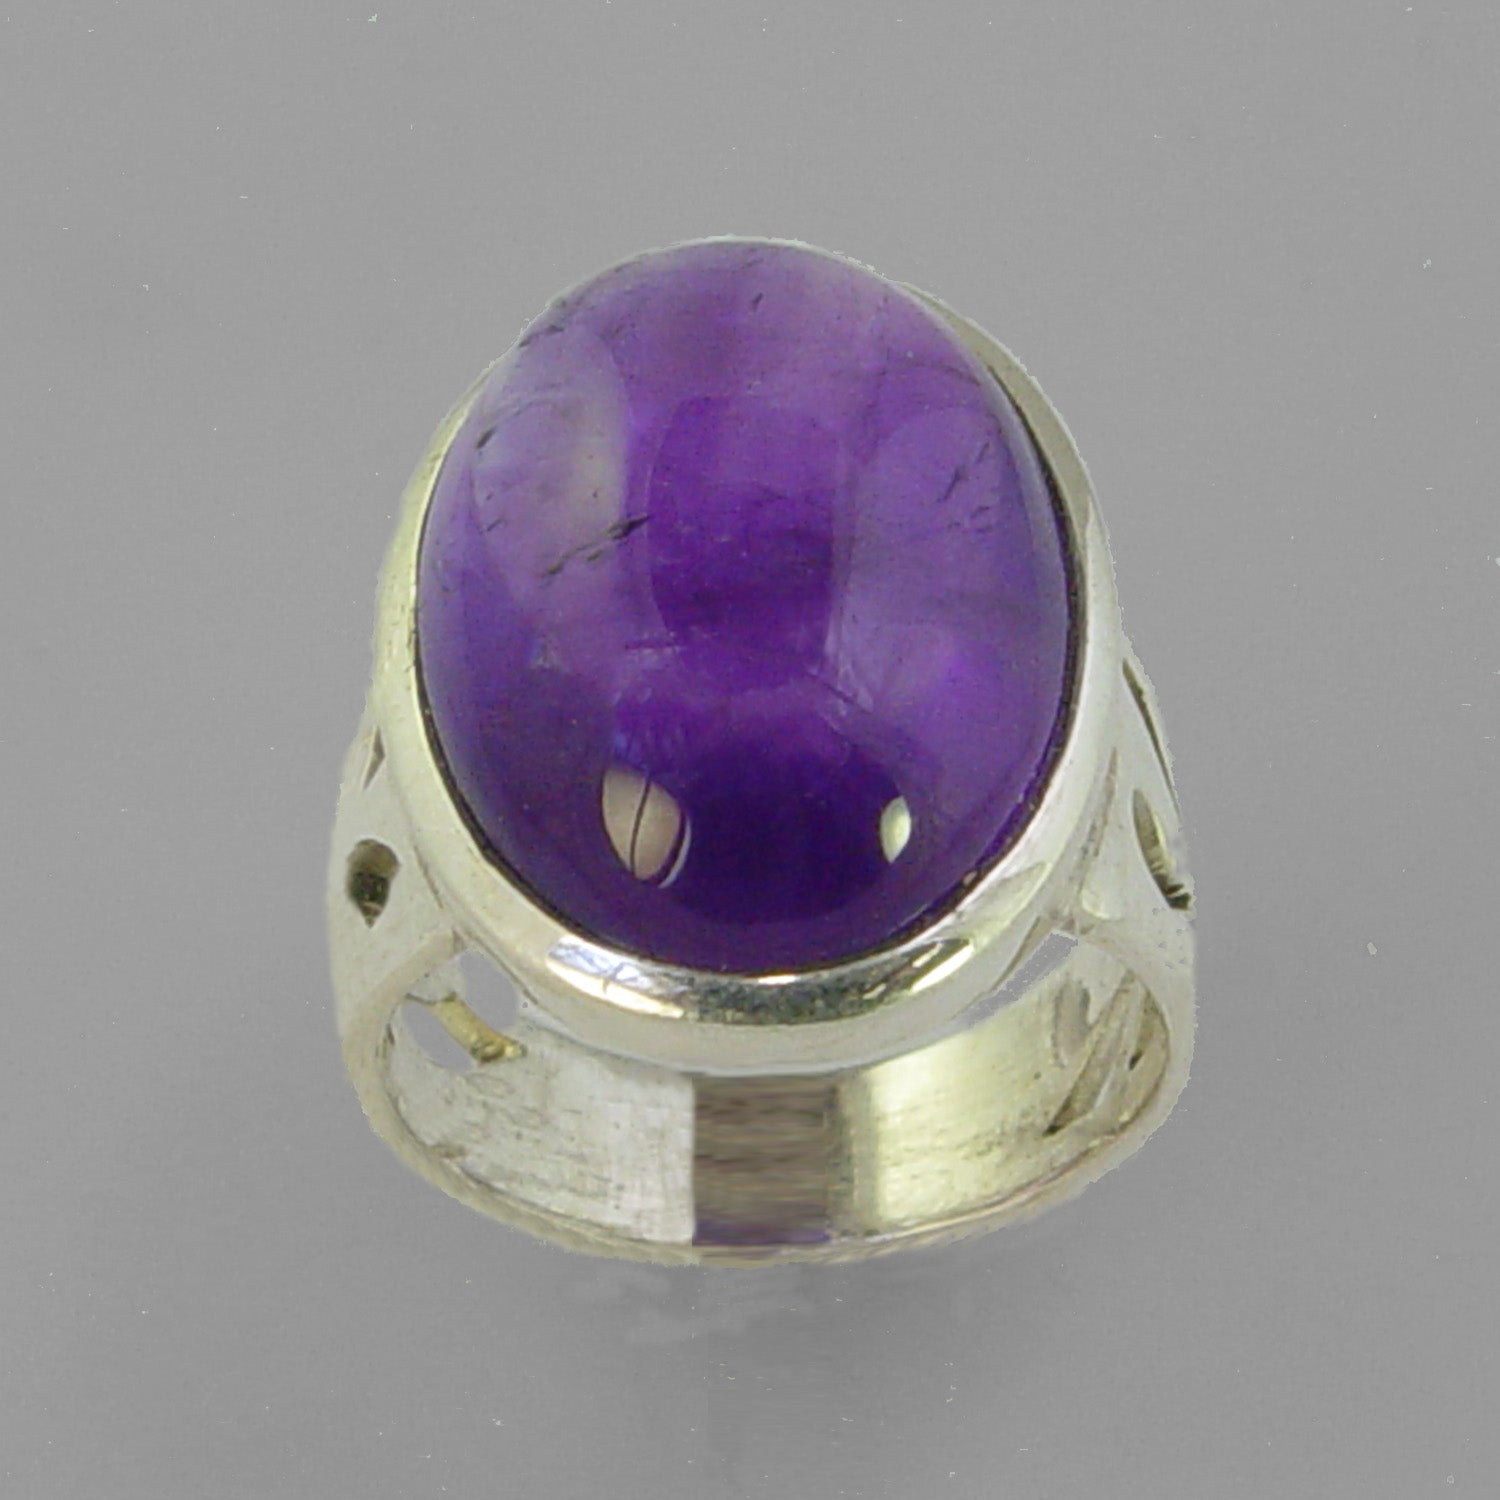 Amethyst 9.1 ct Oval Cab Bezel Set Sterling Silver Ring, Size 5.5